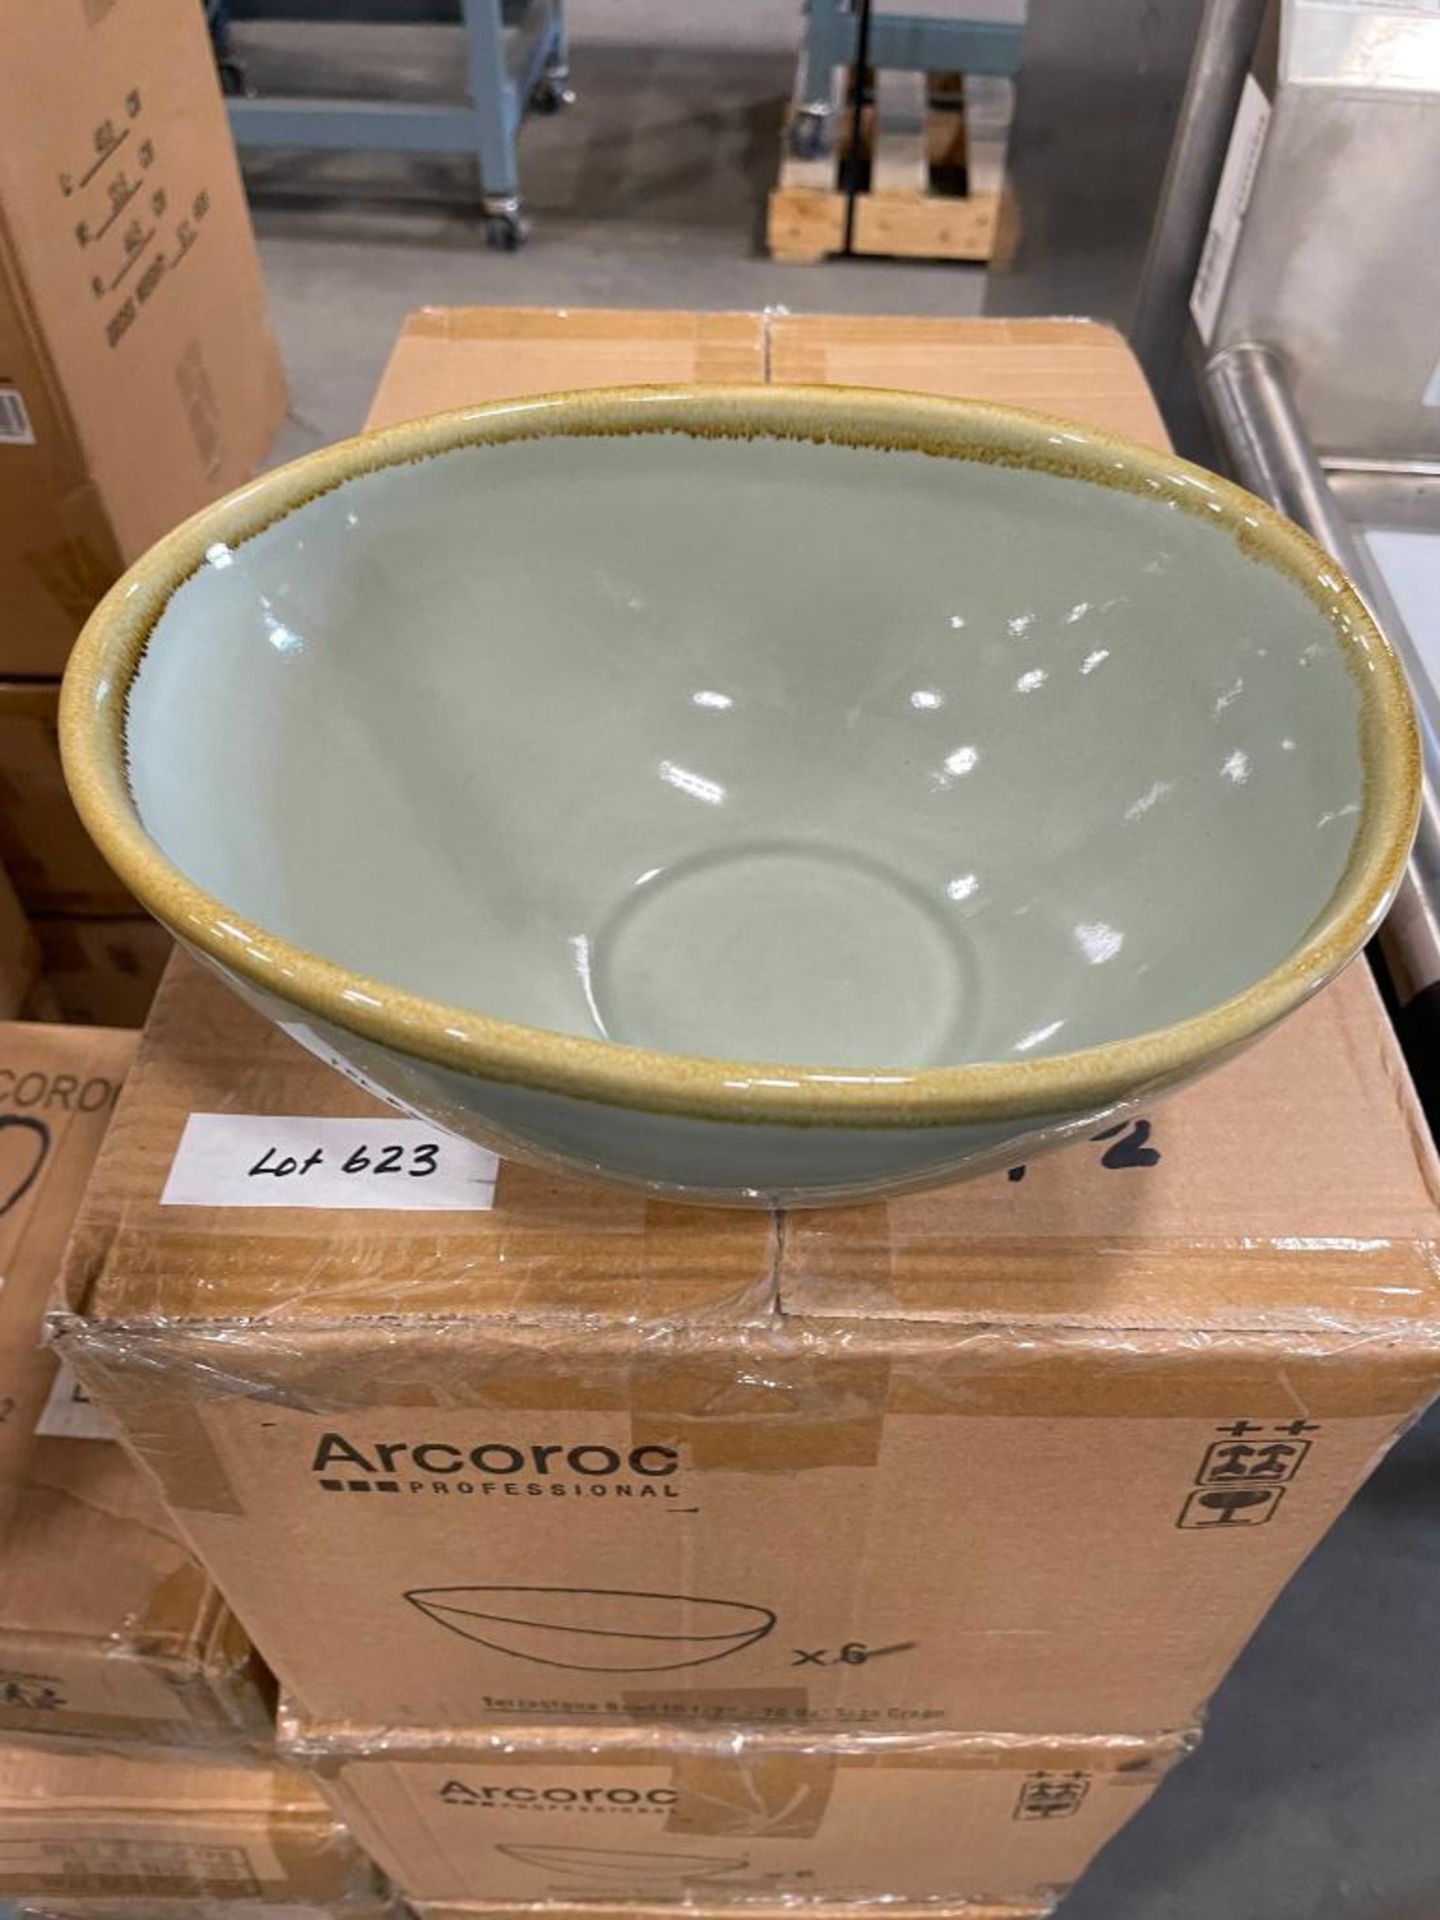 3 CASES OF TERRASTONE 10 1/2" SAGE GREEN BOWL - 6/CASE, ARCOROC - NEW - Image 2 of 3